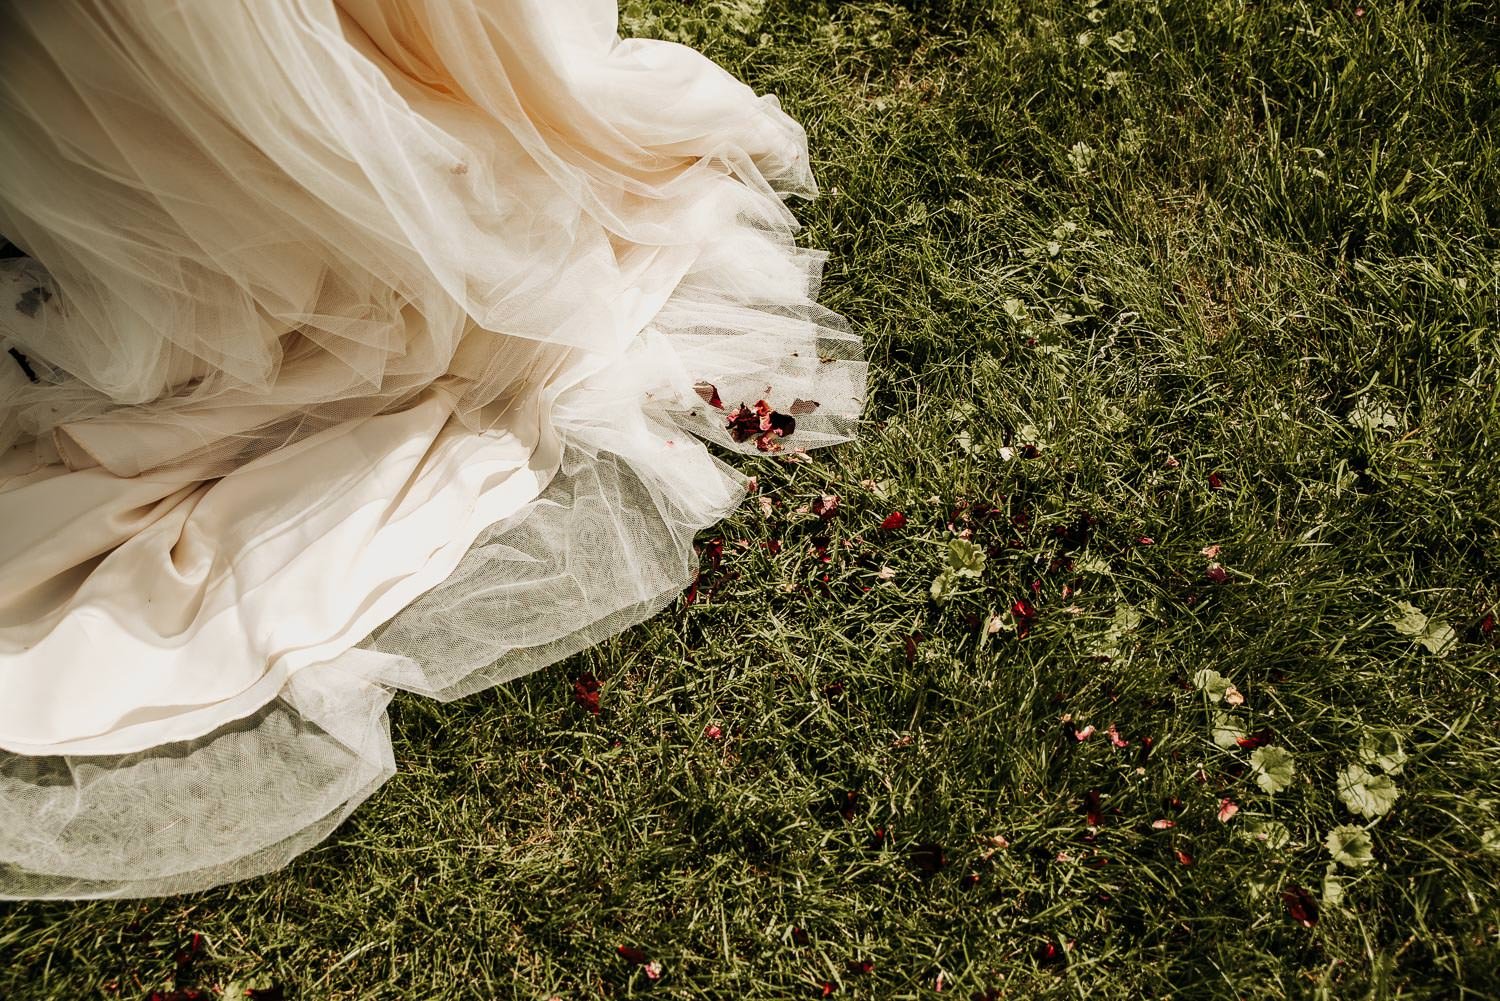 Wedding dress trailing on the grass with rose petal confetti at wedding party